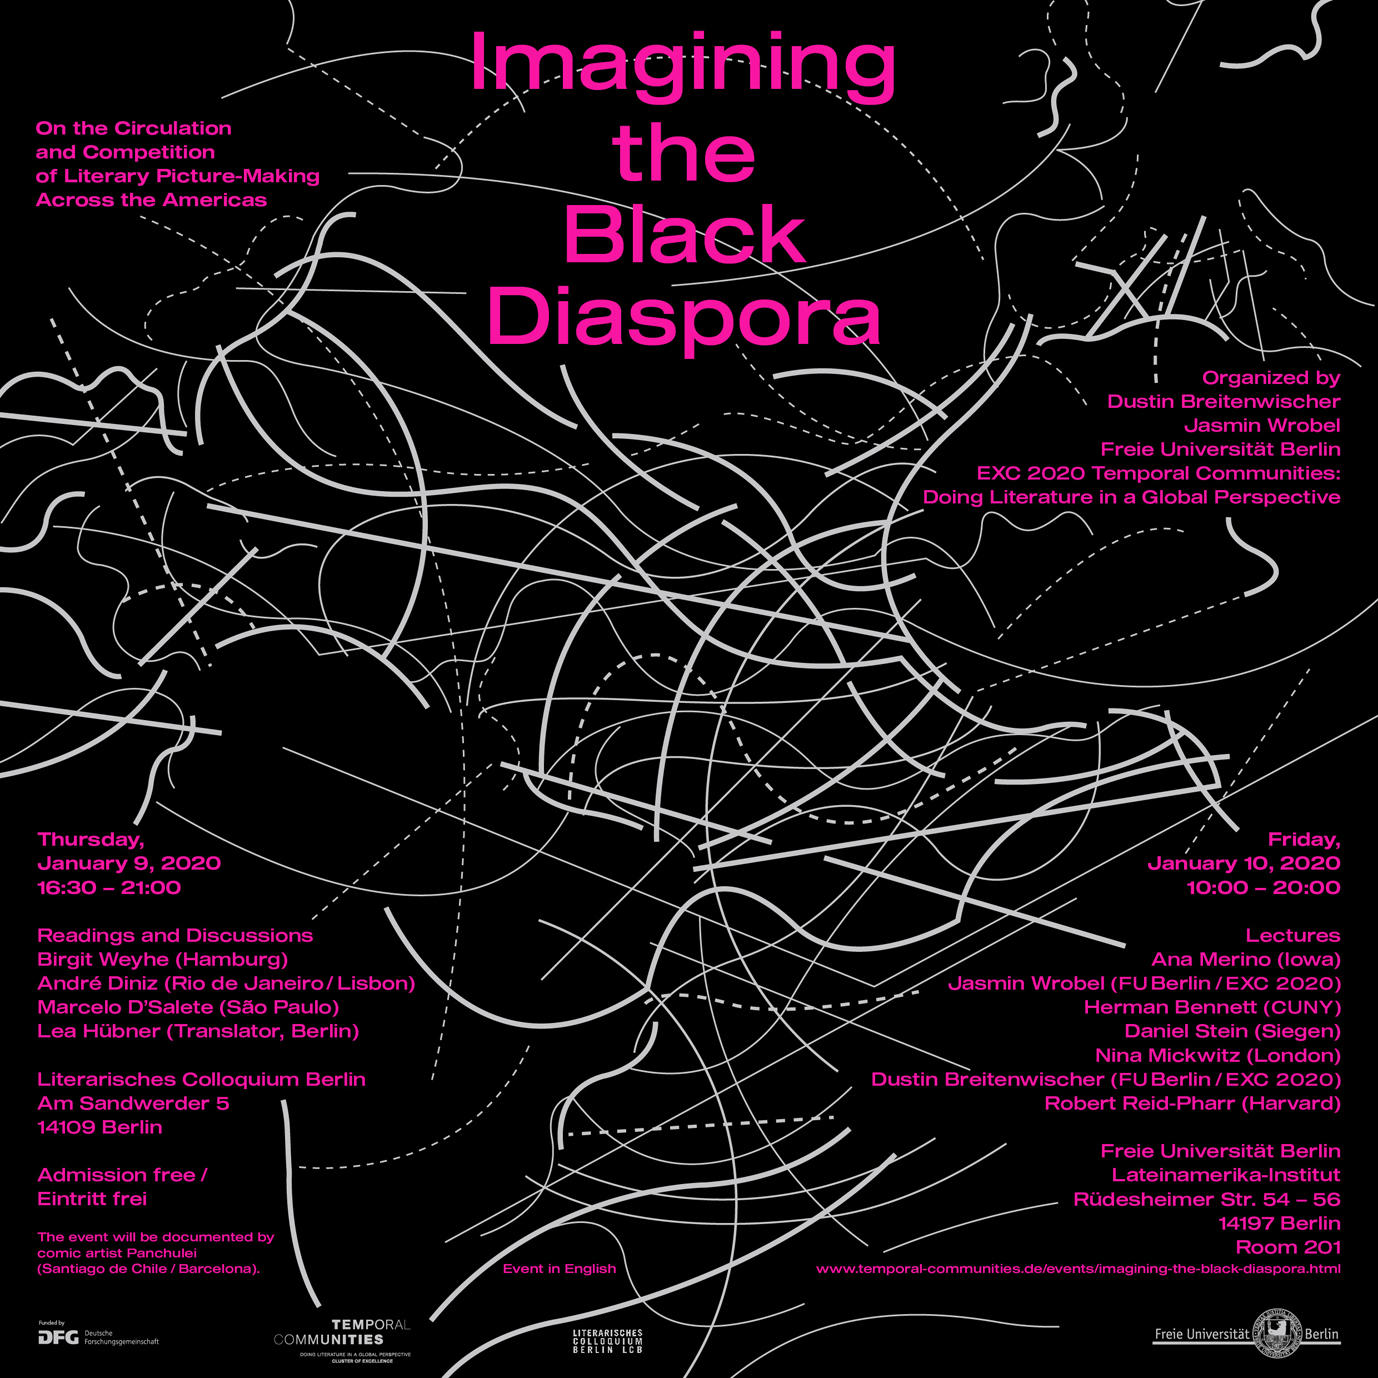 Poster for "Imagining the Black Diaspora: On the Circulation and Competition of Literary Picture-Making across the Americas"